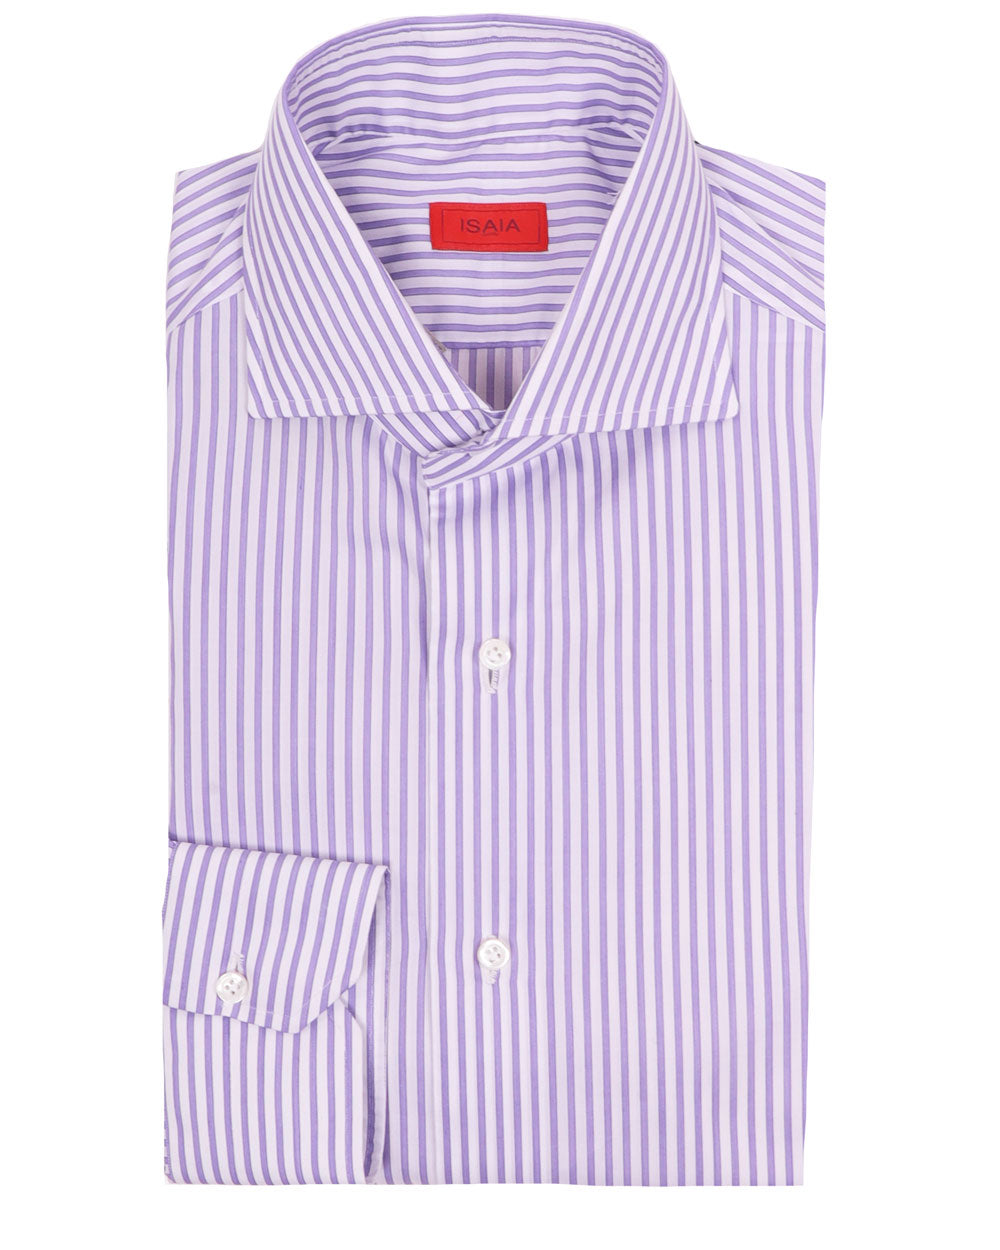 White and Lilac Striped Dress Shirt